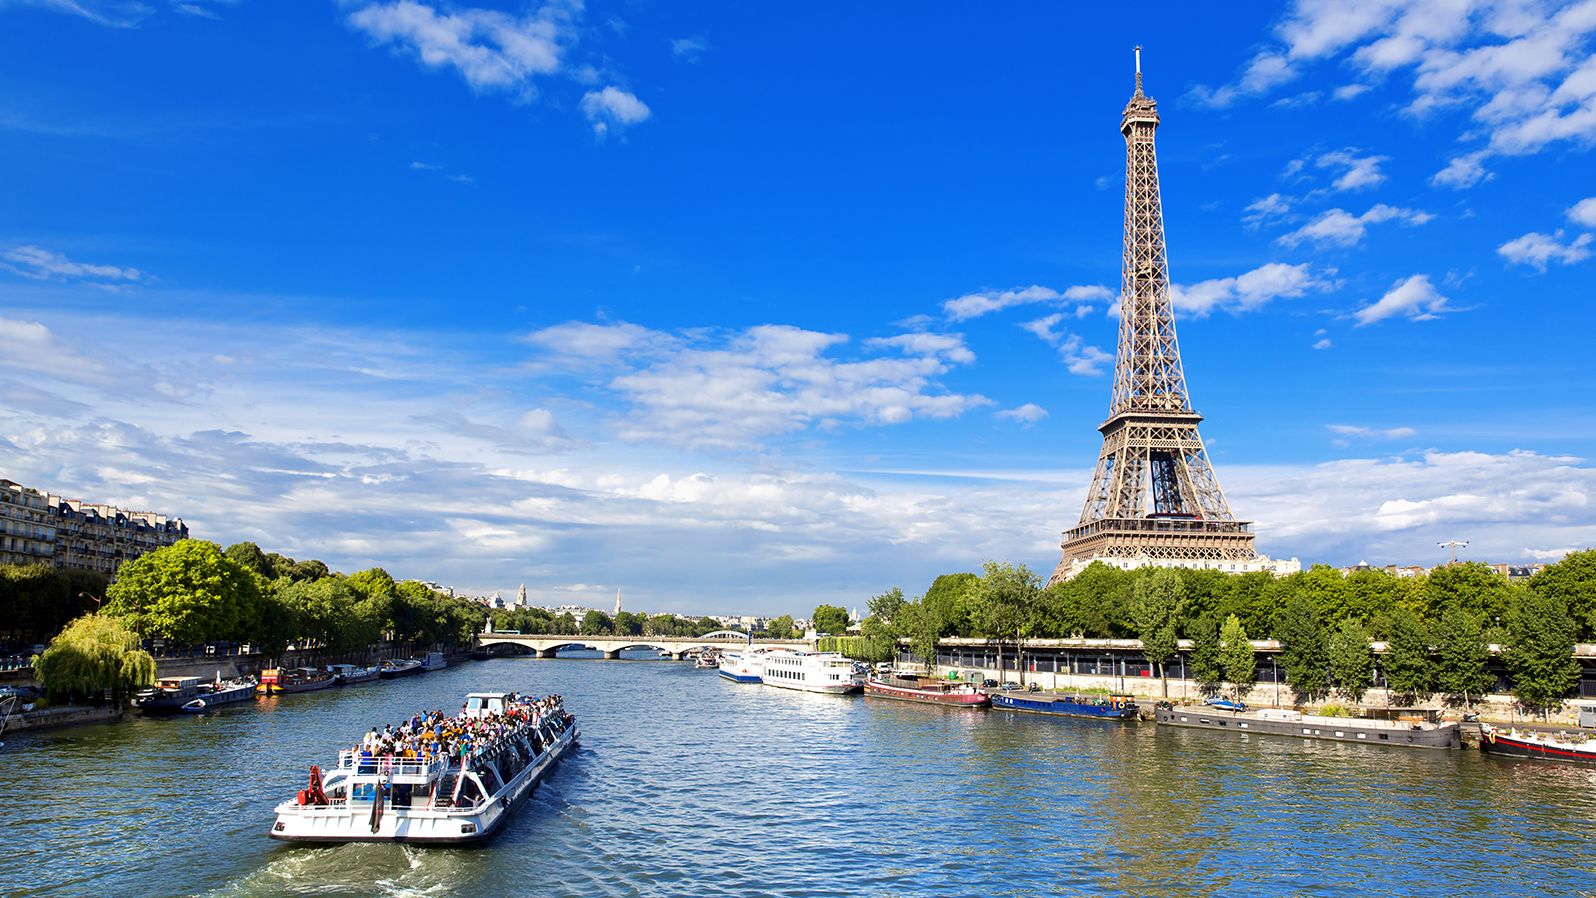 Paris, the beautiful view of the Eiffel Tower on a summer day